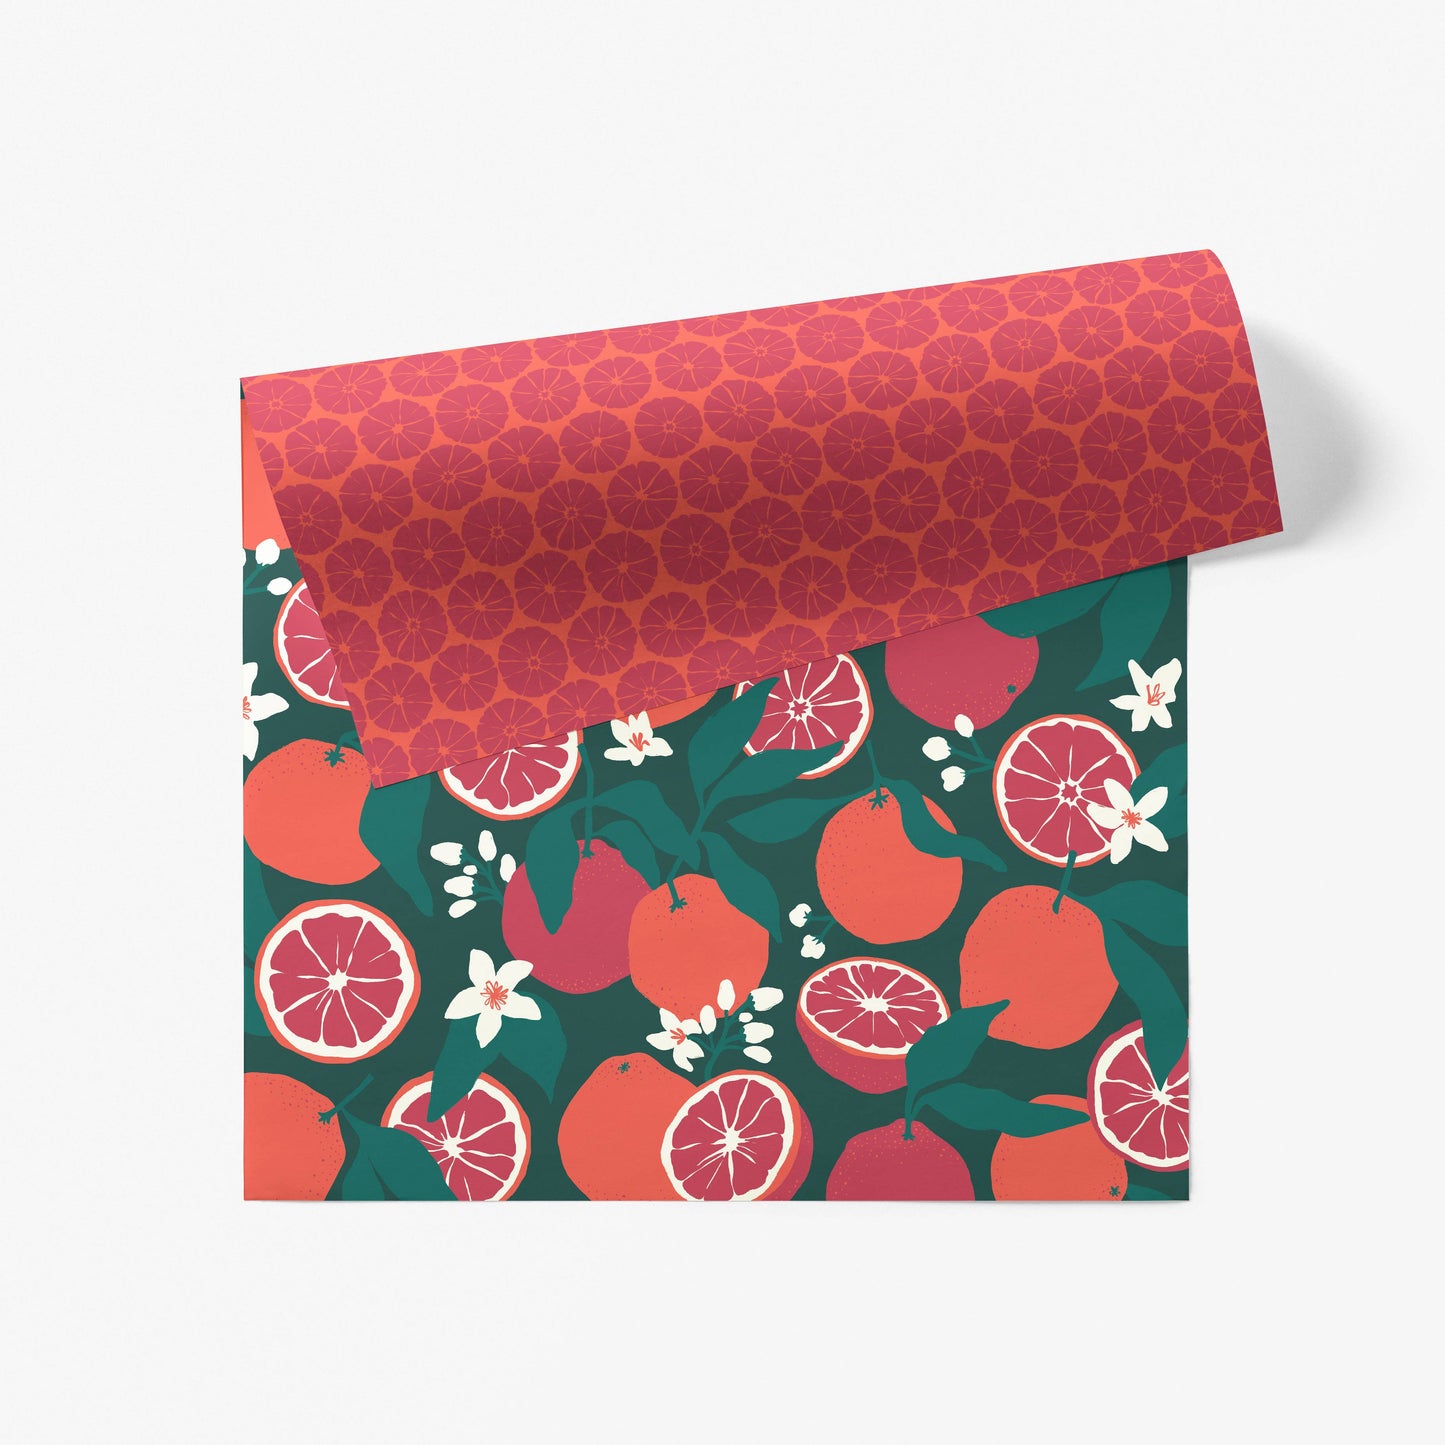 Sheet of double-sided wrappng paper -- one side is dark green with blood oranges, the other is orange with dark red citrus slices 